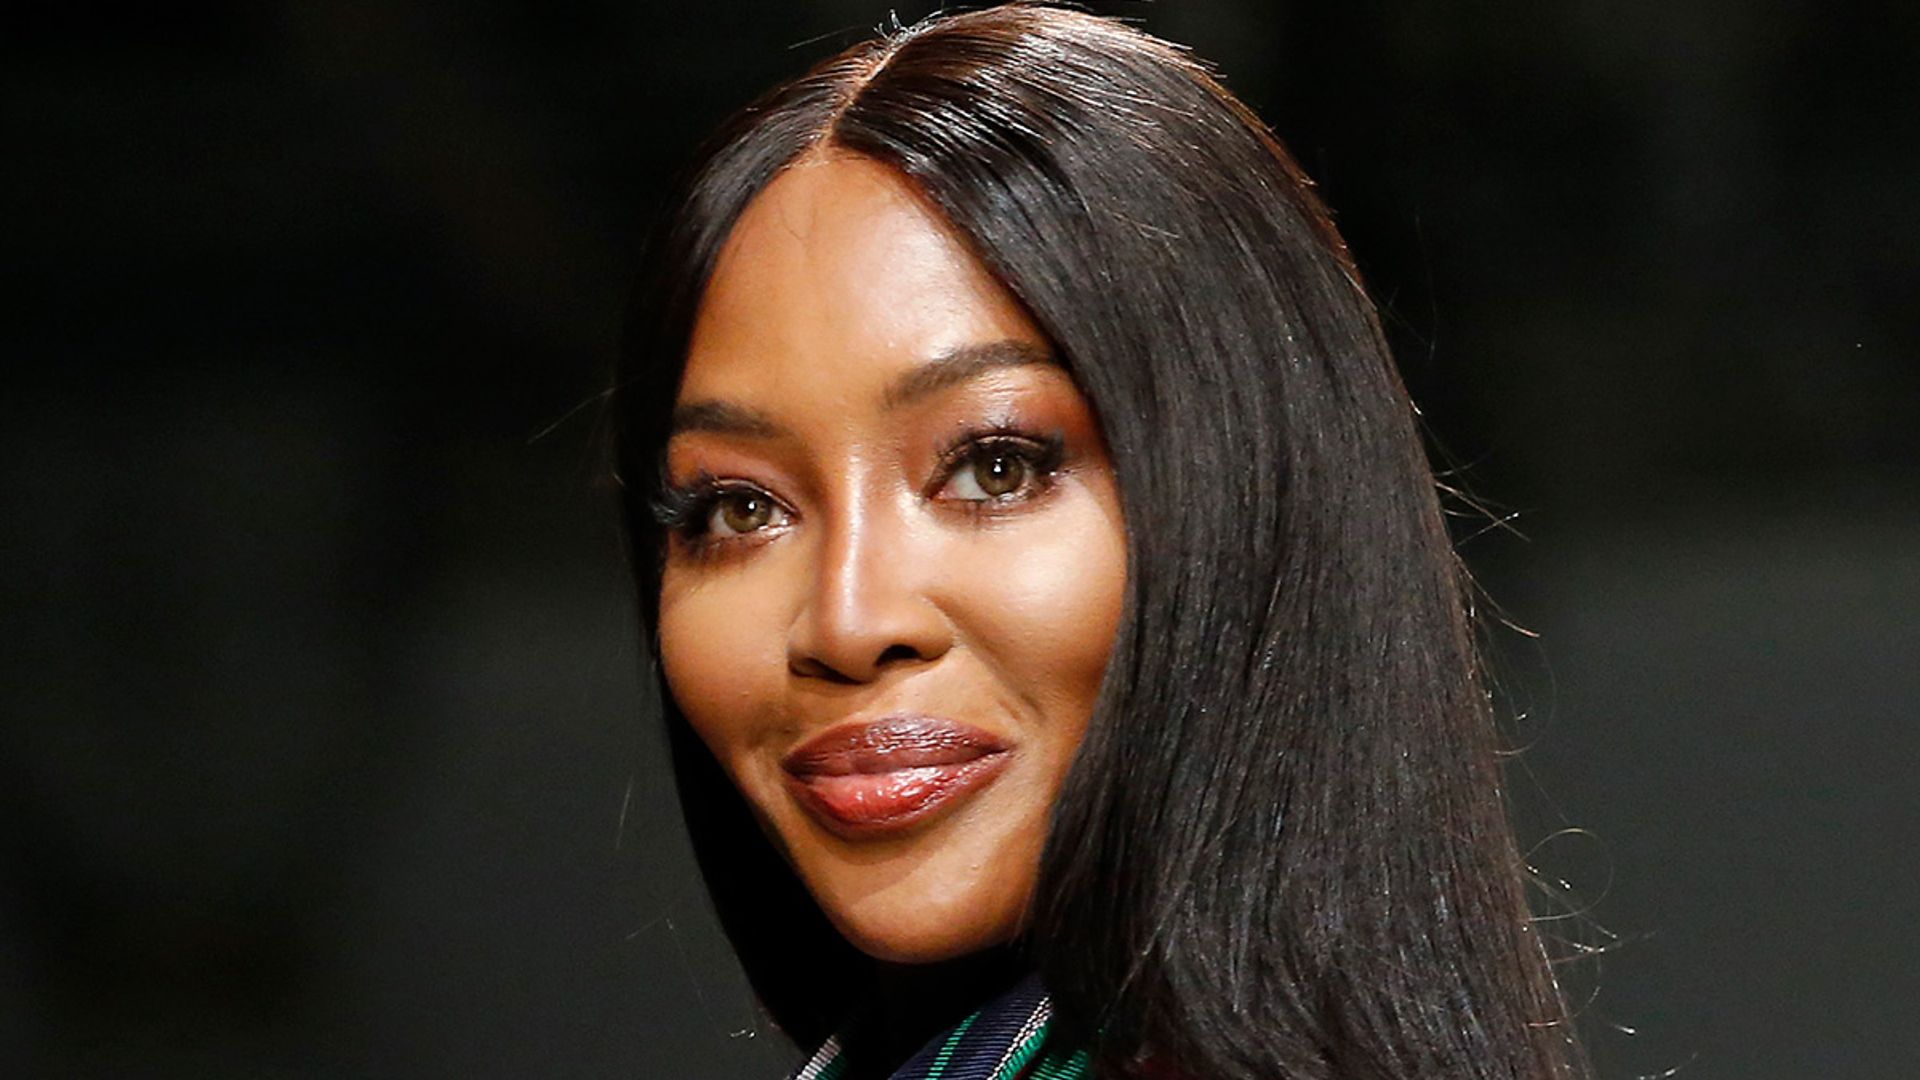 New mom Naomi Campbell celebrates special occasion with star-studded photo